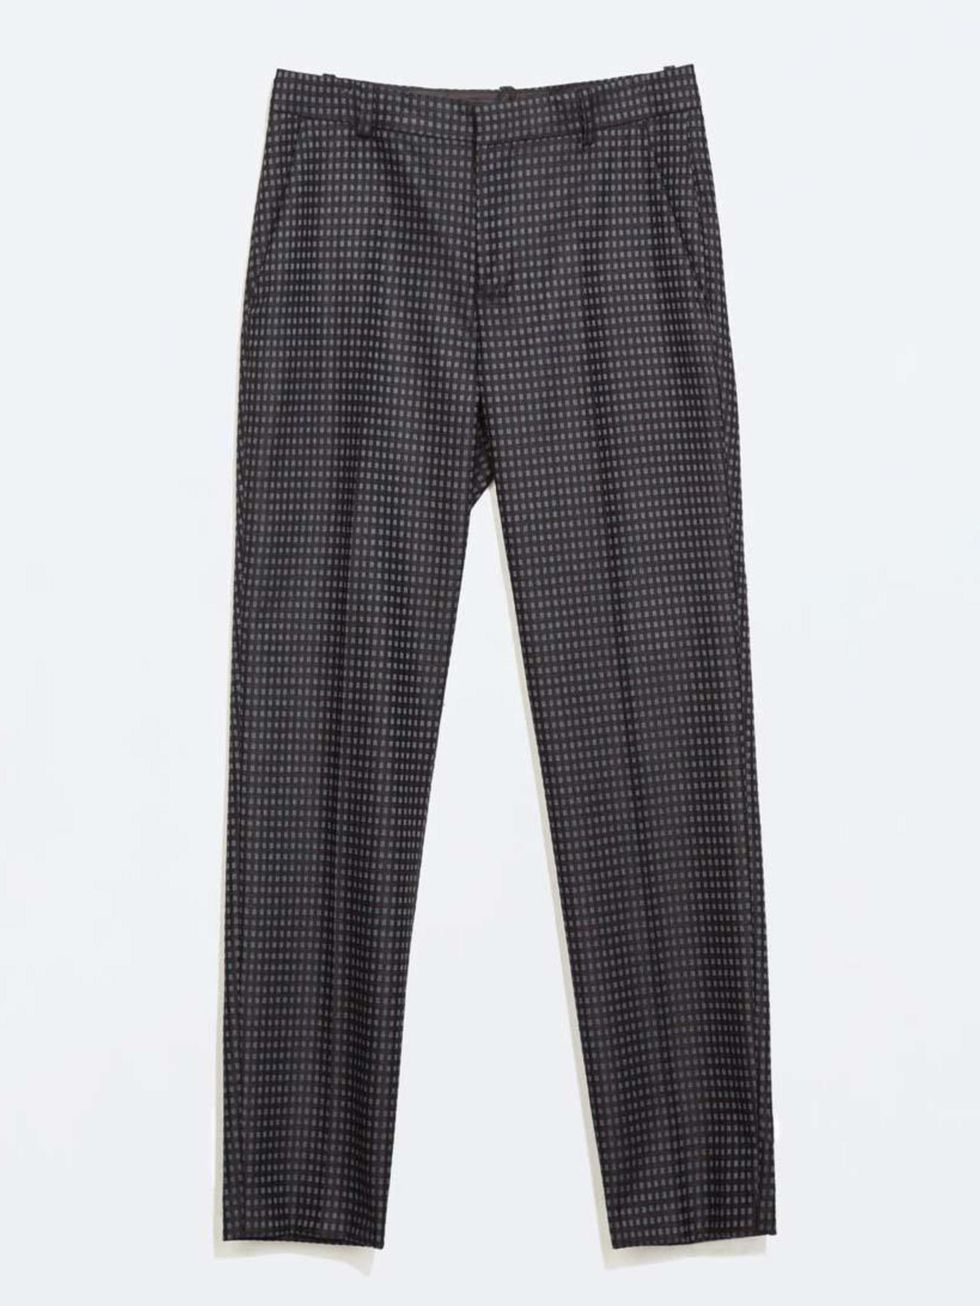 <p>Pair your kimono with a pair of mannish trousers</p>

<p><a href="http://www.zara.com/uk/en/woman/trousers/checked-skinny-trousers-c269187p2212006.html">Zara</a>, £35.99</p>